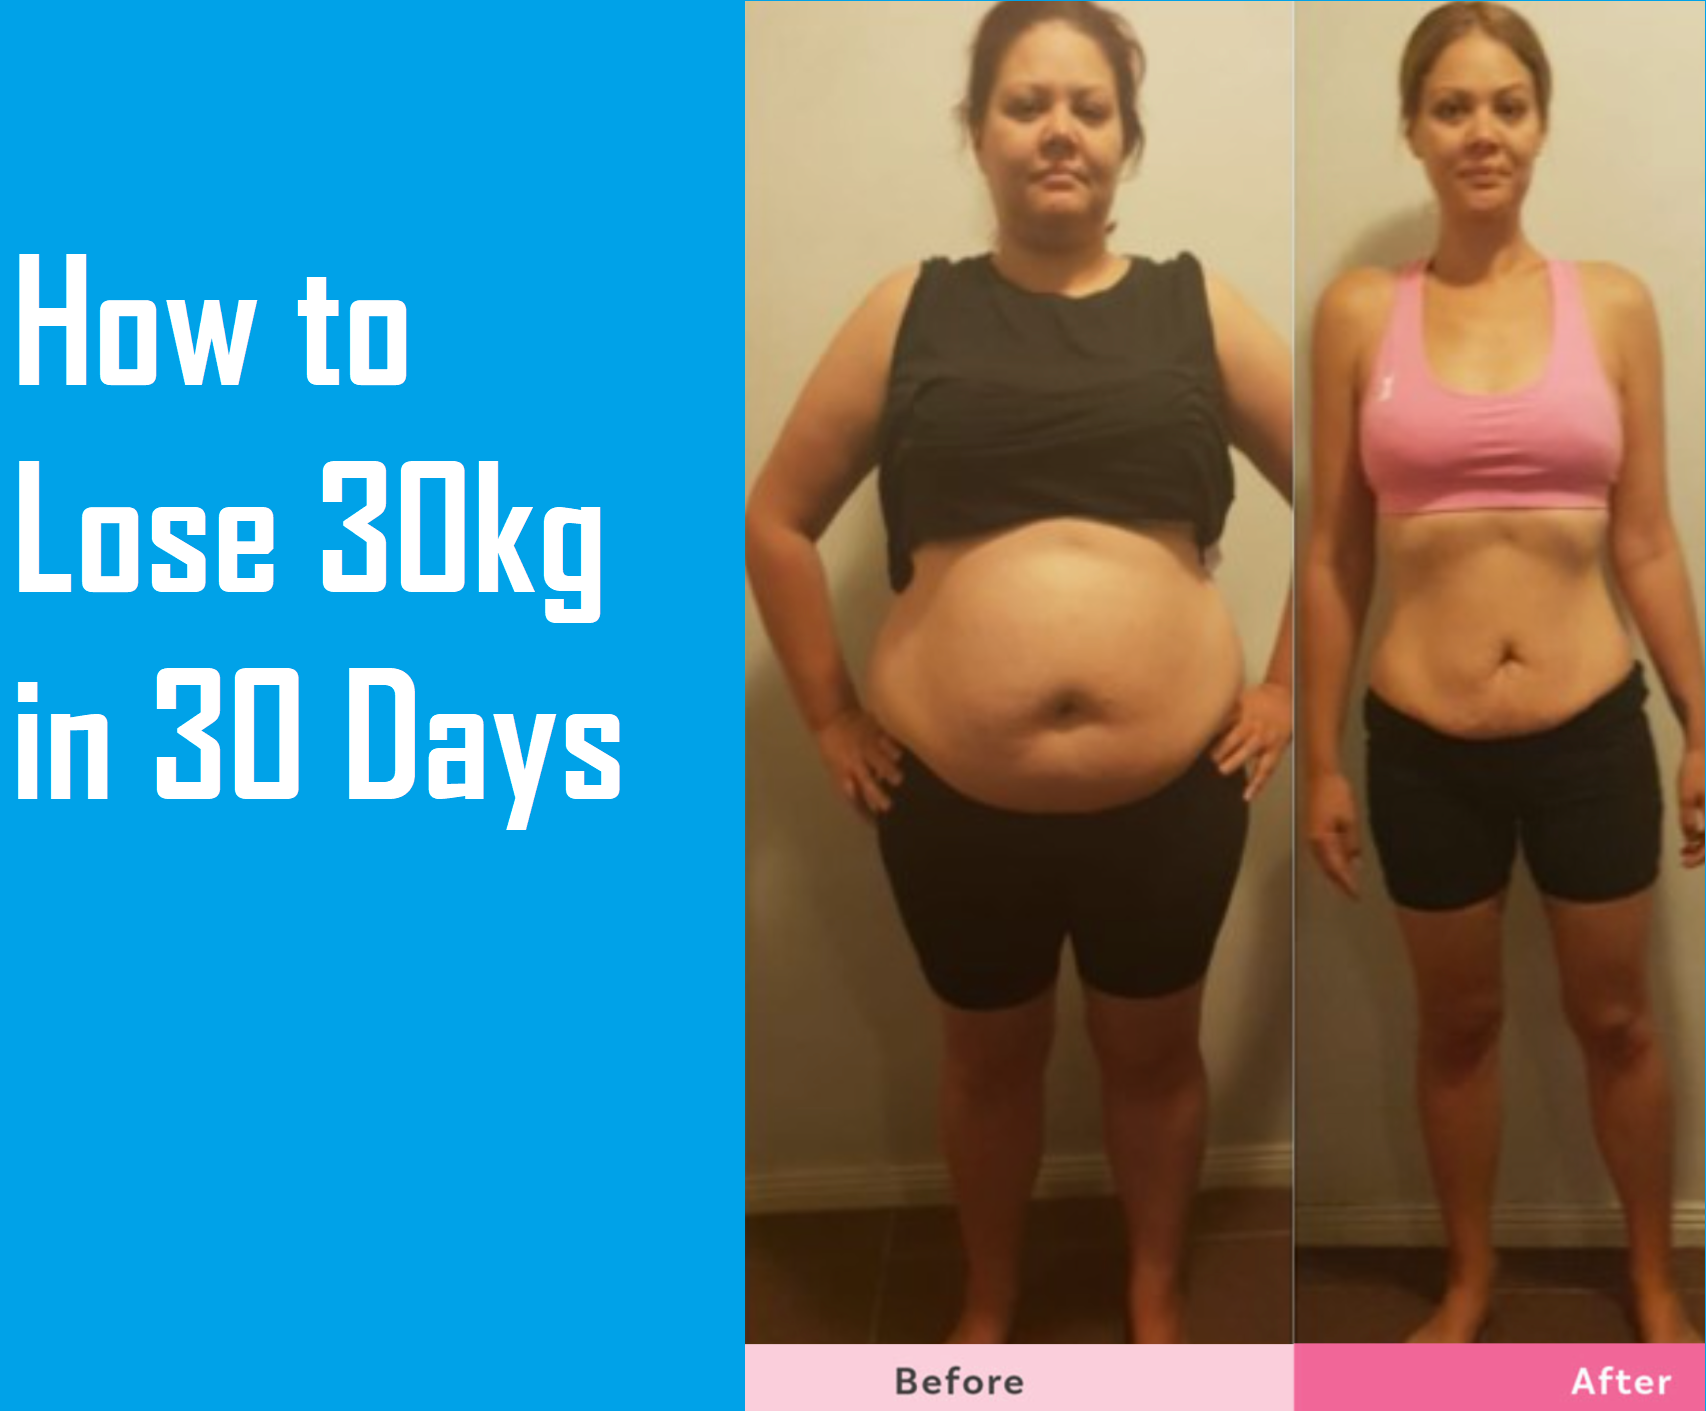 How to Lose 30kg in 30 Days